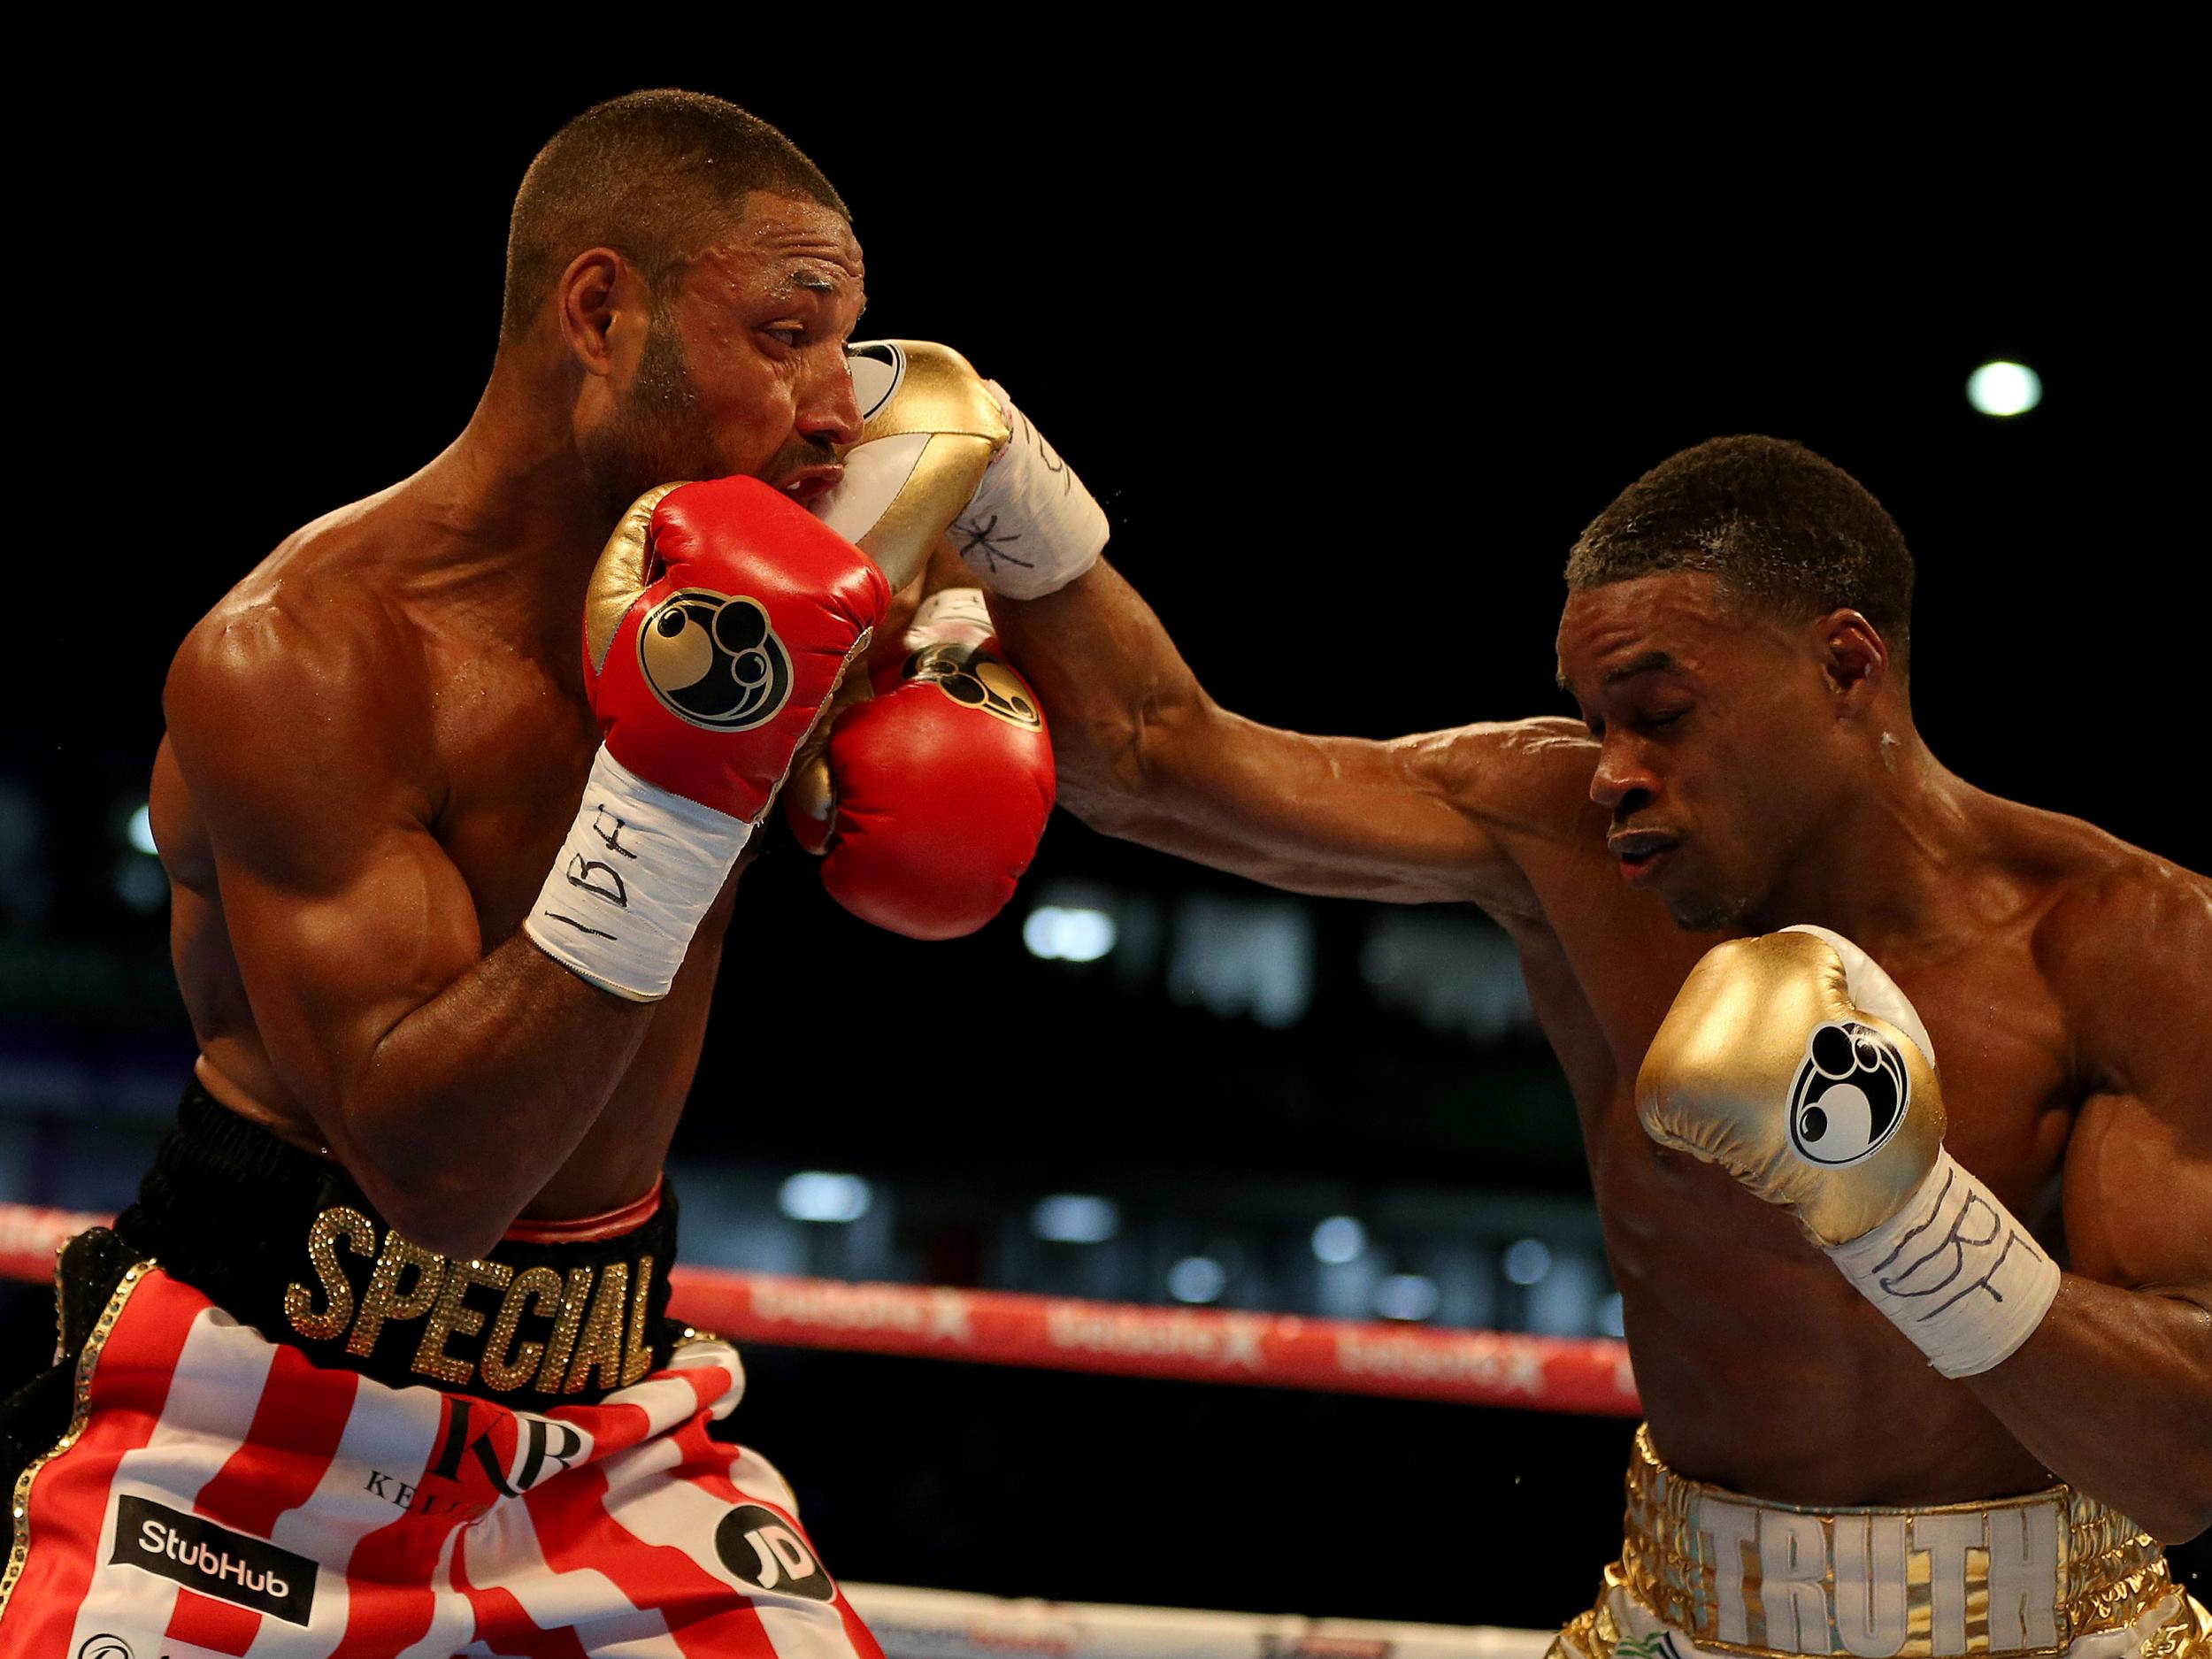 Kell Brook's reign in the division came to an end at the hands of American talent Errol Spence Jr